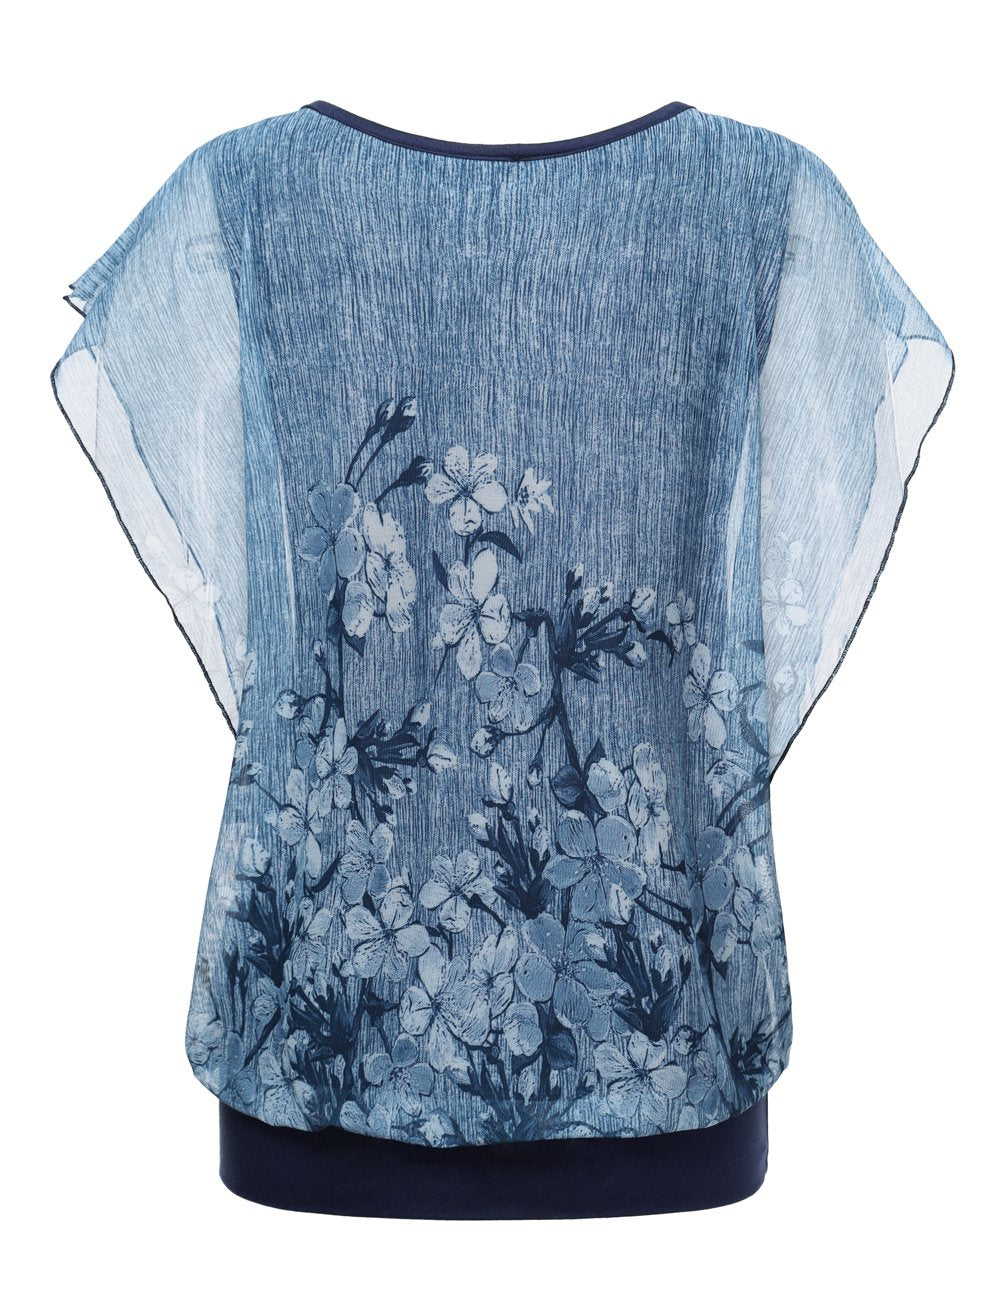 BAISHENGGT Blue Floral Women's Printed Flouncing Flared Short Sleeve Mesh Blouse Tops